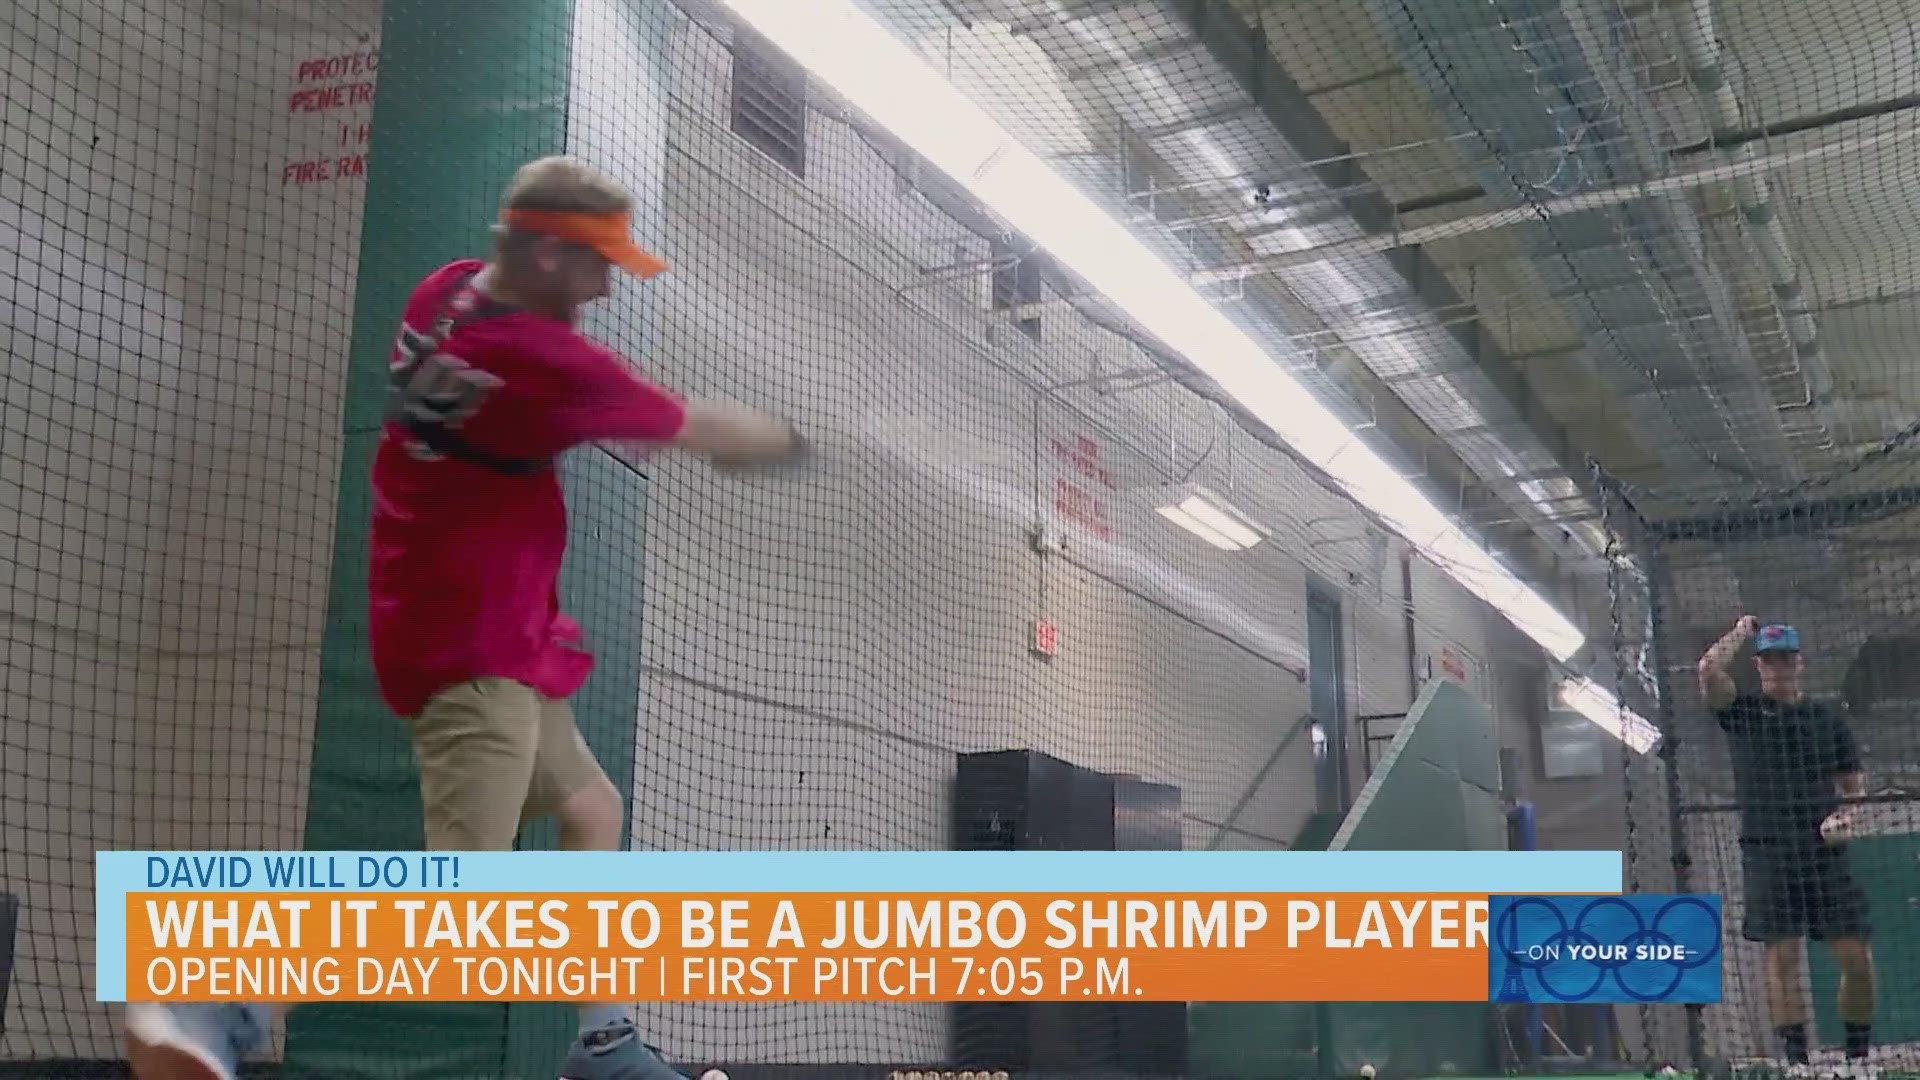 Baseball season is back! See if David has what it takes to become a Jumbo Shrimp.